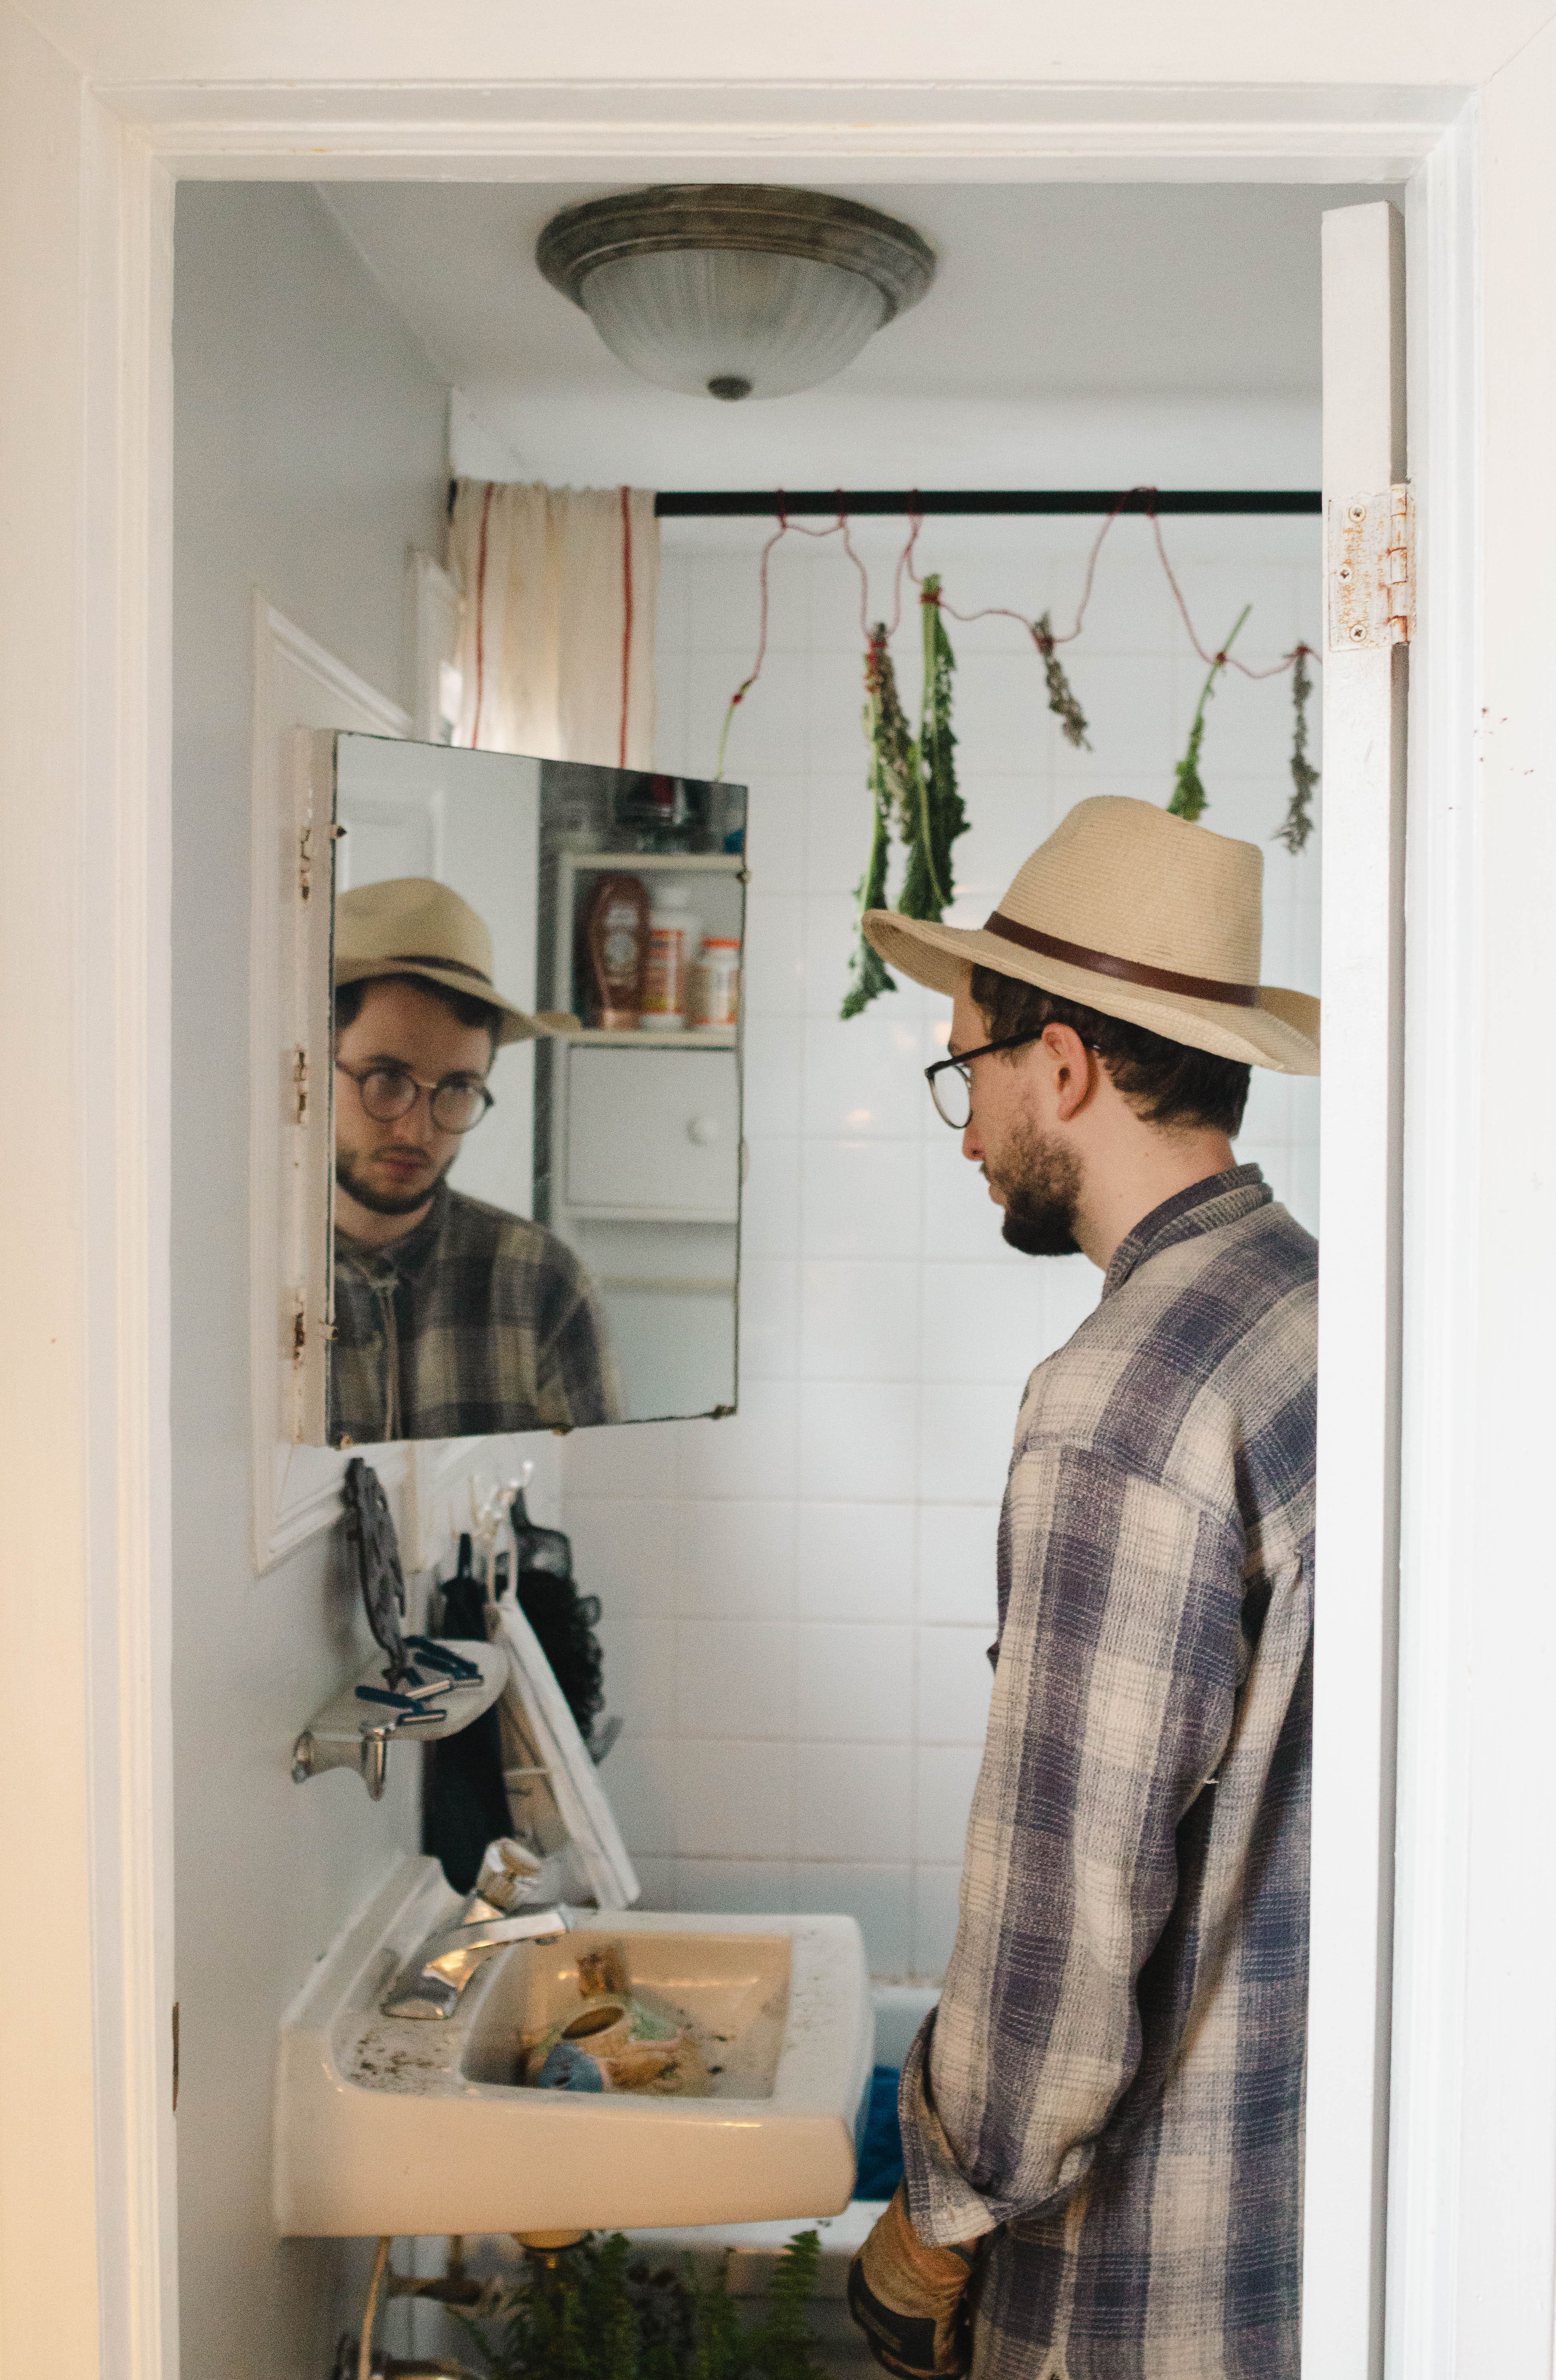 The farmer looks himself in the bathrom mirror. In the background, herbs hang from the shower curtain rod to dry